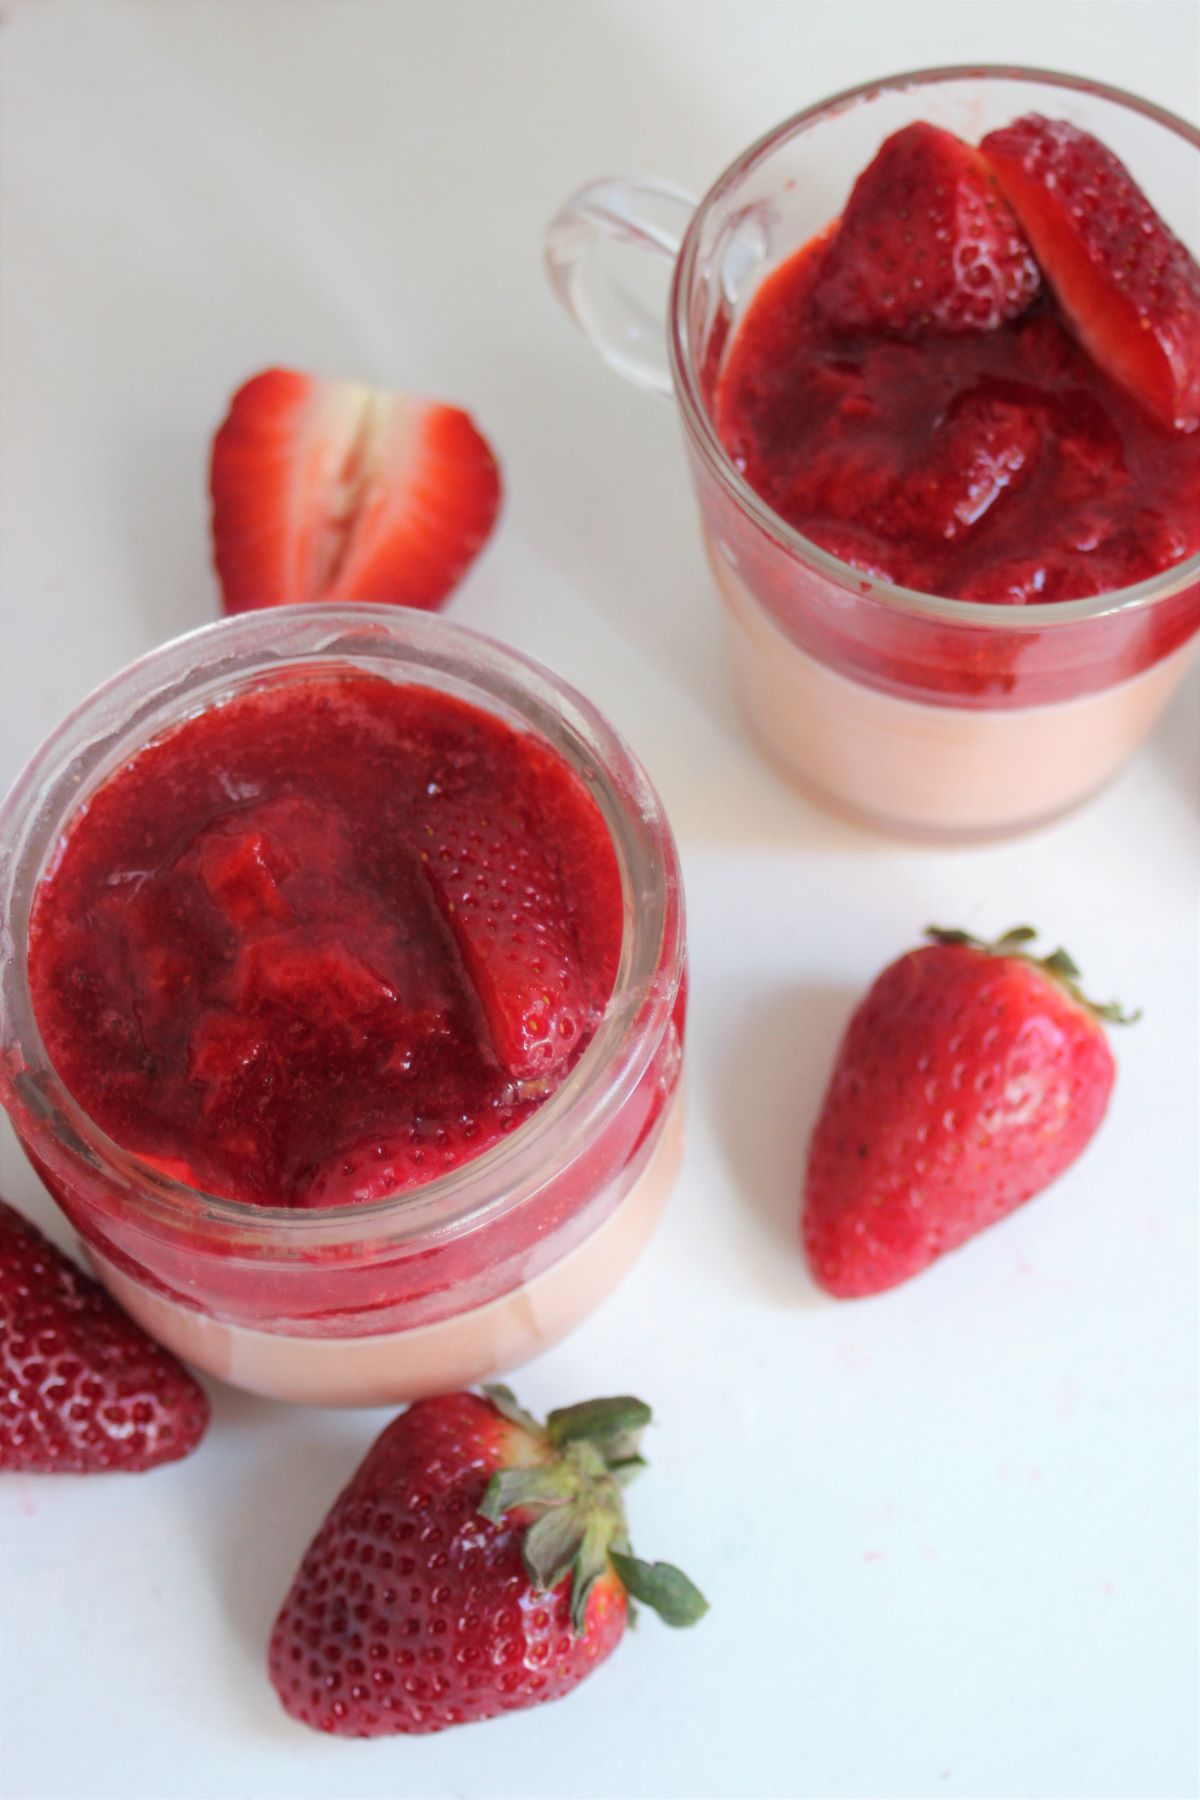 Two glass jars with strawberry panna cotta and strawberry sauce. Fresh strawberries on the side.